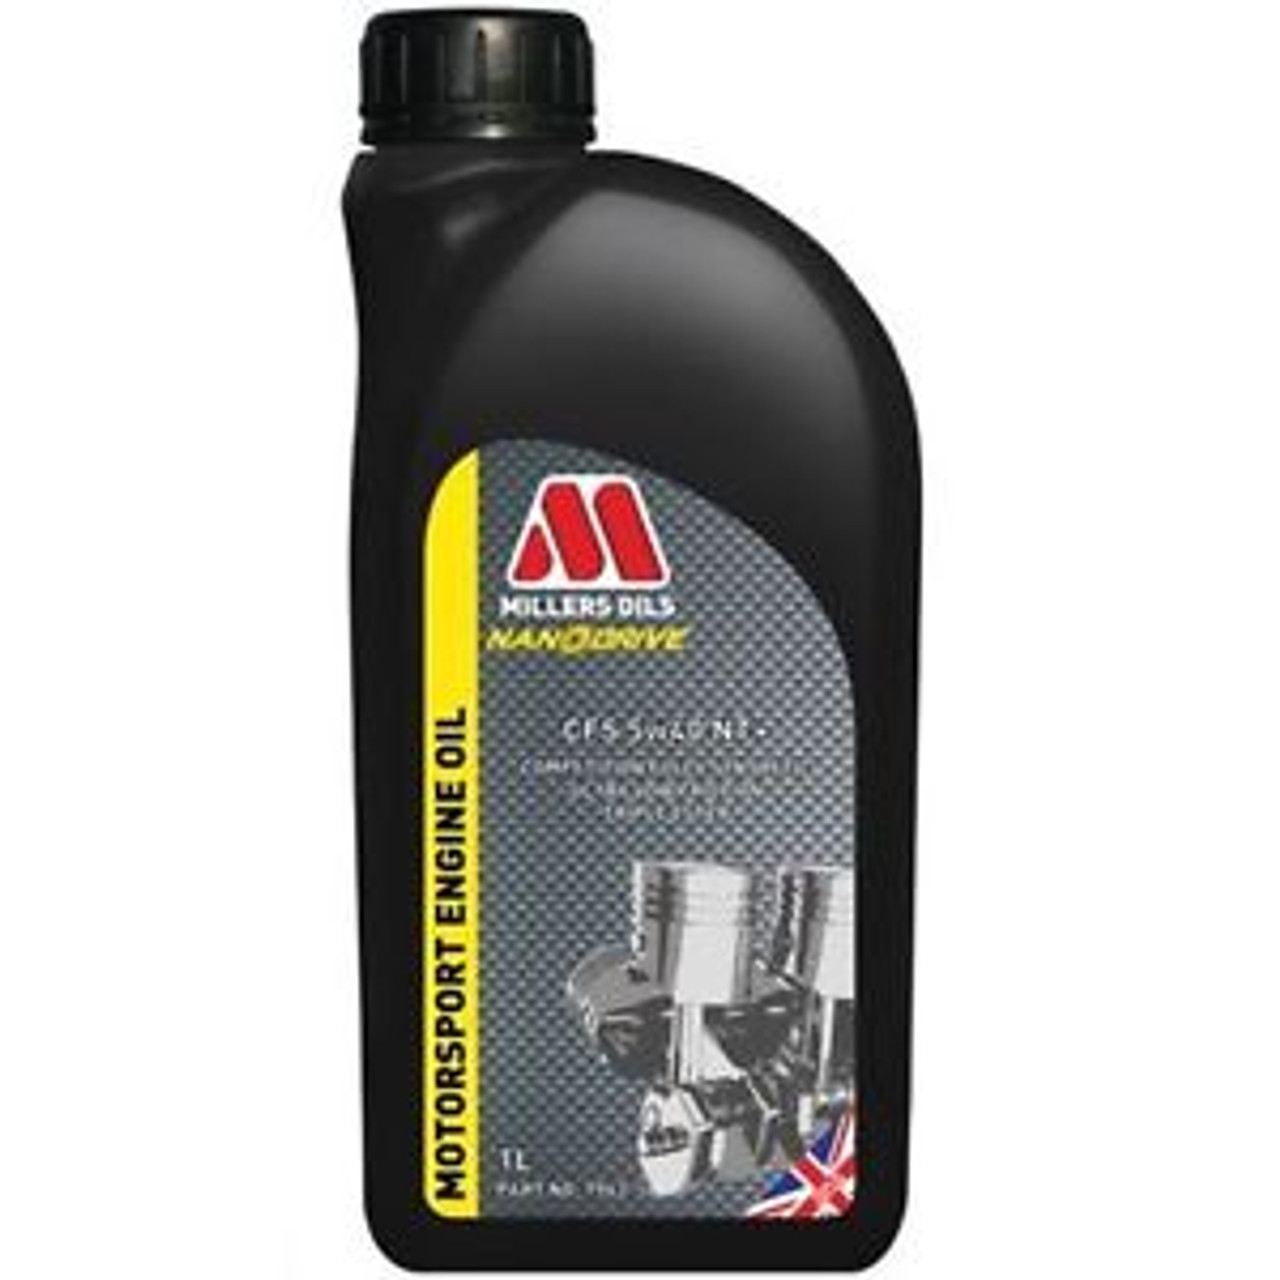 Millers Nanodrive 'CFS' 5w40 NT+ Engine Oil - 1 Litre - Awesome GTI -  Volkswagen Audi Group Specialists